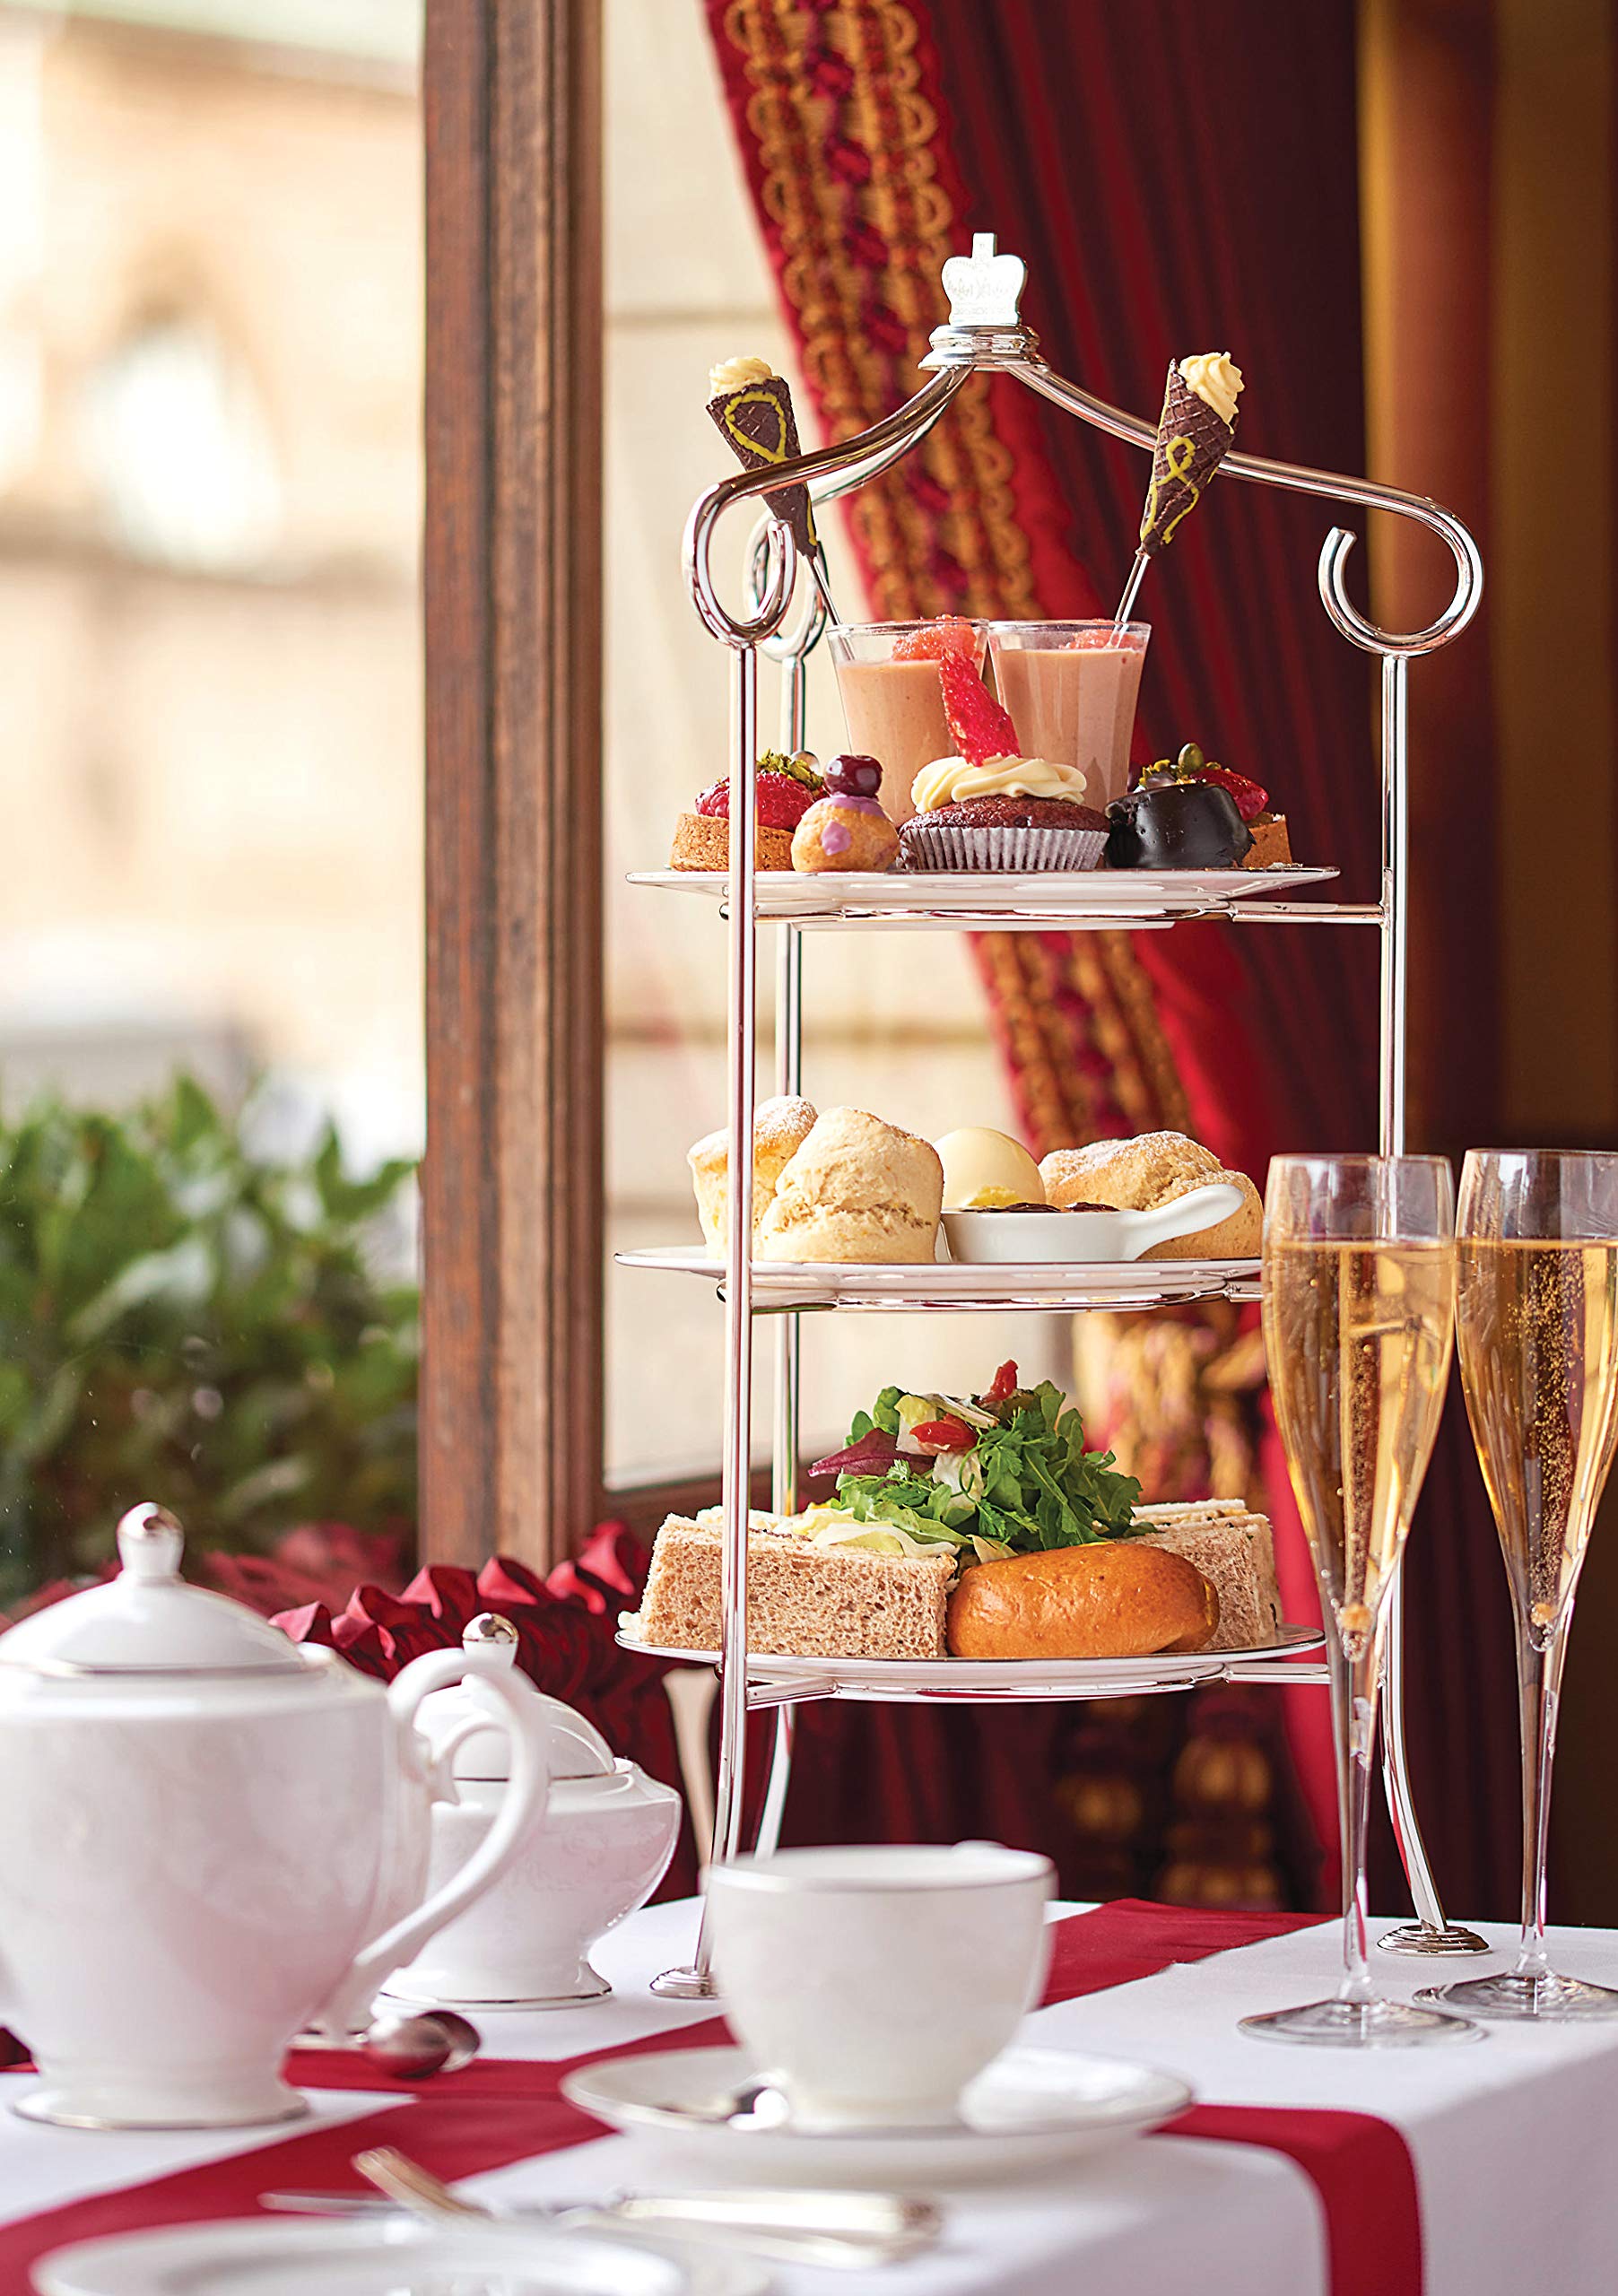 London's Afternoon Teas, Revised and Expanded 2nd Edition: A Guide to the Most Exquisite Tea Venues in London (IMM Lifestyle) 60 of the Best Places to Take Tea, with Recipes, Venue History, & More